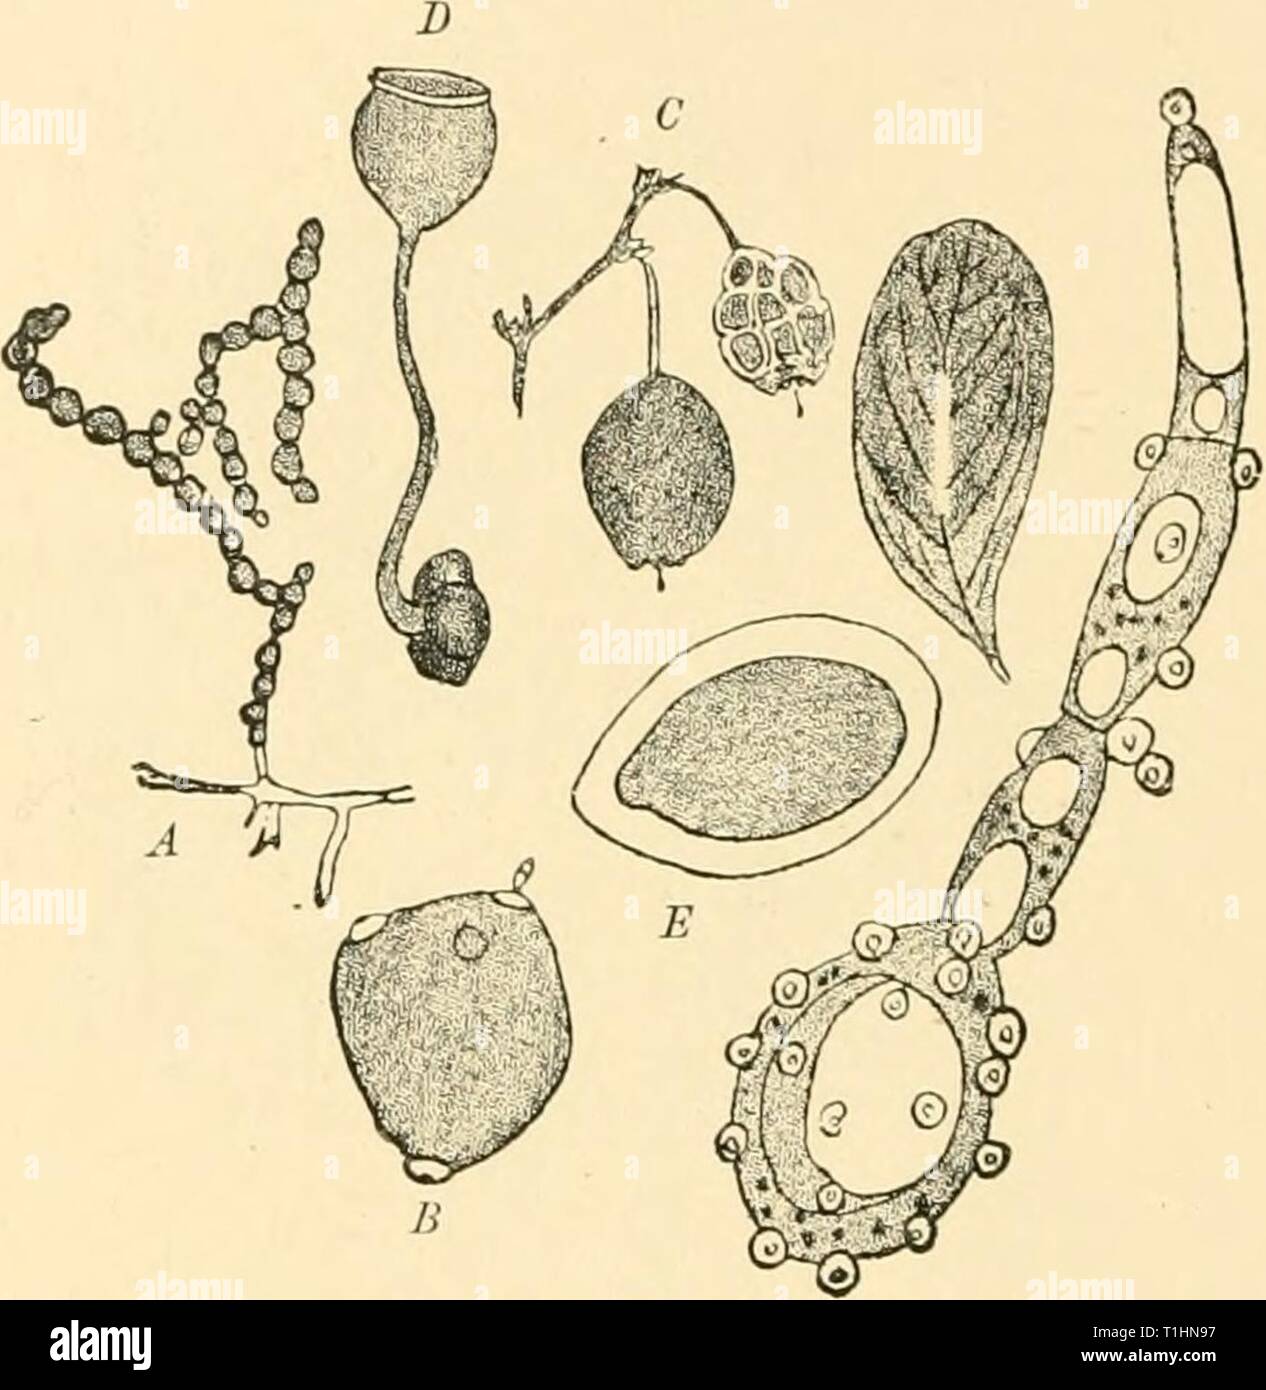 Diseases of plants induced by Diseases of plants induced by cryptogamic parasites; introduction to the study of pathogenic Fungi, slime-Fungi, bacteria, & Algae  diseasesofplants00tube Year: 1897  260 ASCOMYCETES. larger and four smaller spores, the latter appearing to be rudi- mentary and incapable of germination. Scl. baccarum Schroet. (Britain). The sclerotium disease of the bilberry ( Face. Myrtillus). This varies from the other species in having round conidia incapable of germinating in water, in having more robust apothecial beakers, and in lacking rhizoids. The spores are similar in num Stock Photo